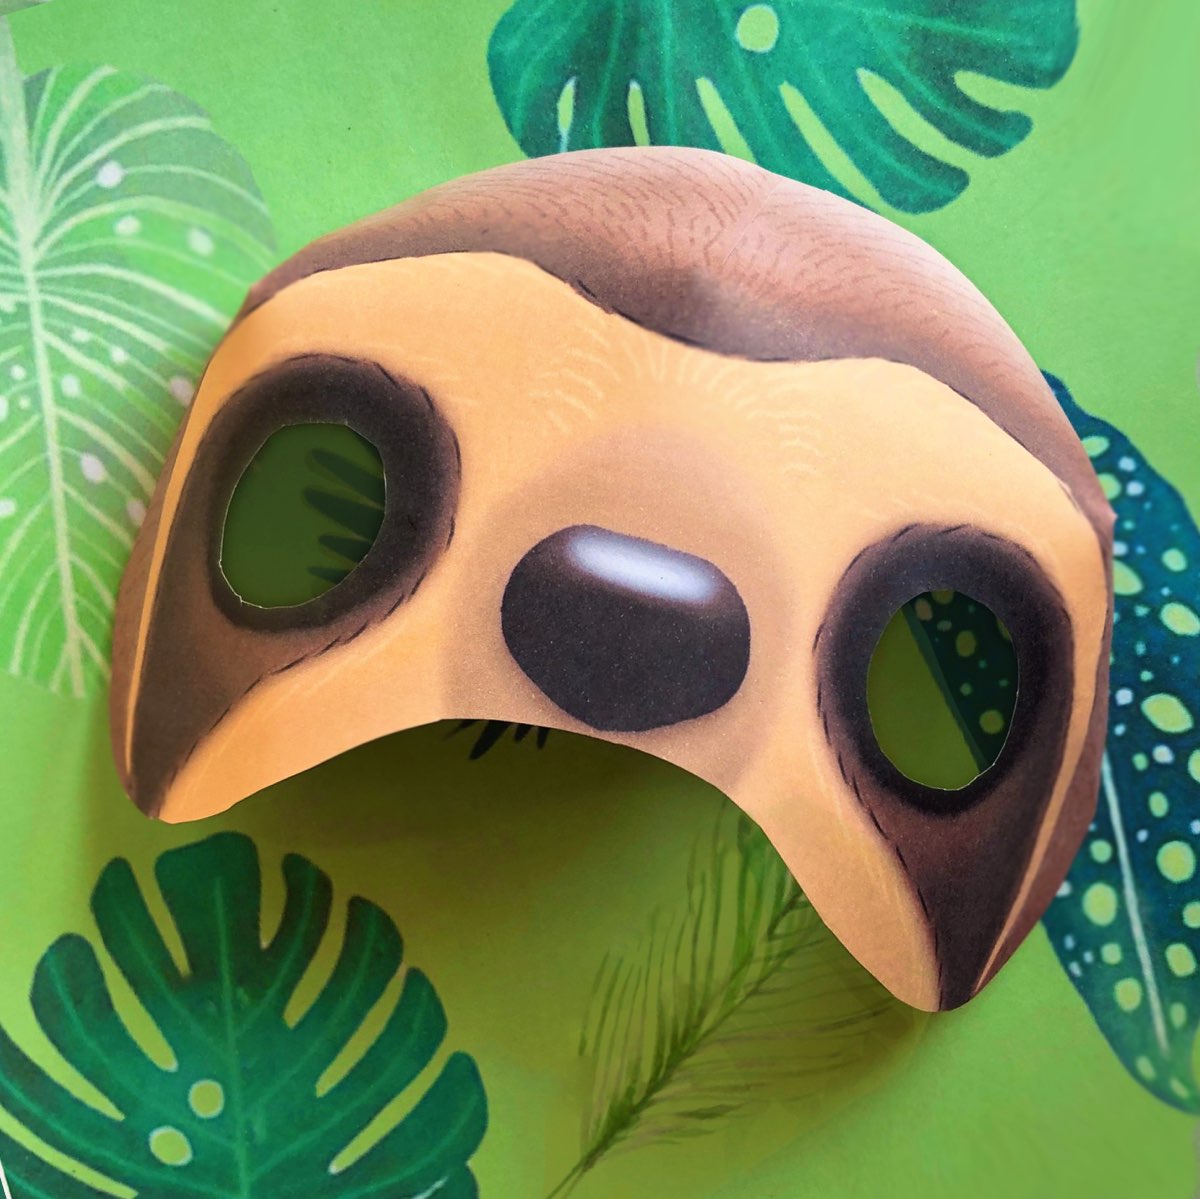 Sloth mask template worksheets Be a sloth today • Happythought